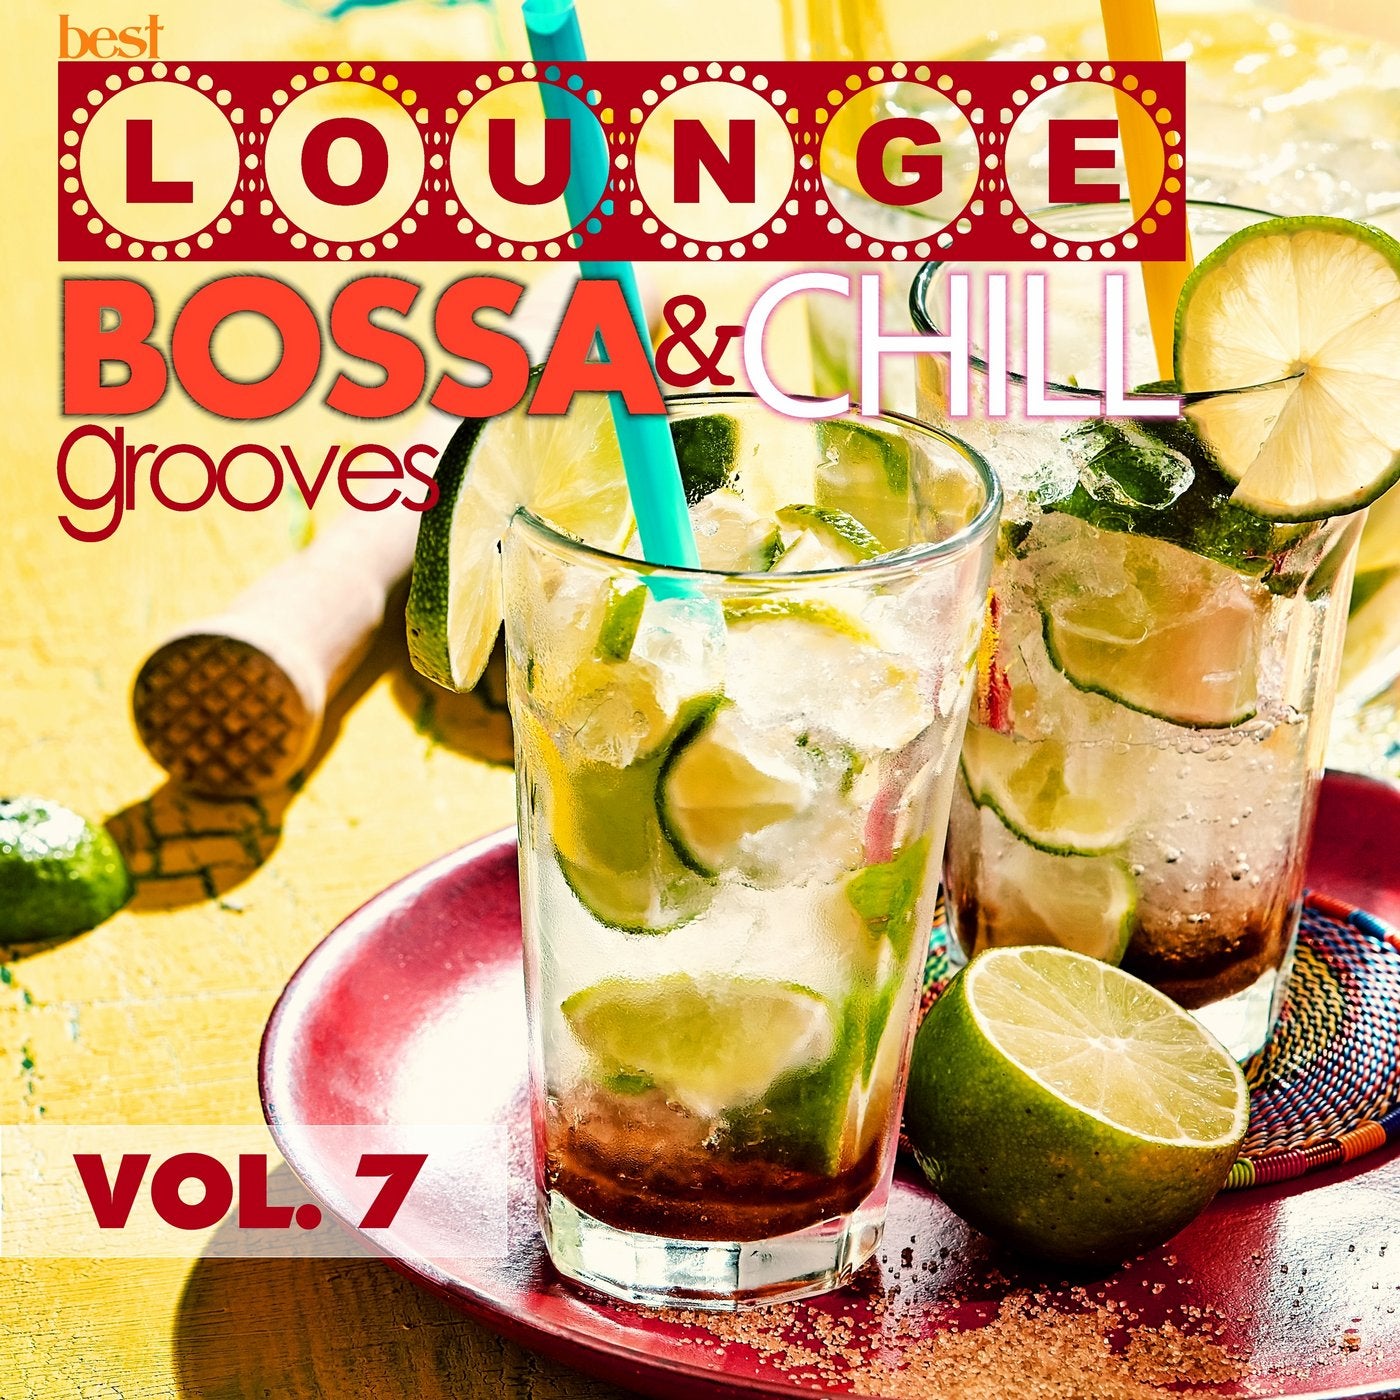 Best Lounge Bossa and Chill Grooves, Vol. 7 - Your Sunday Playlist